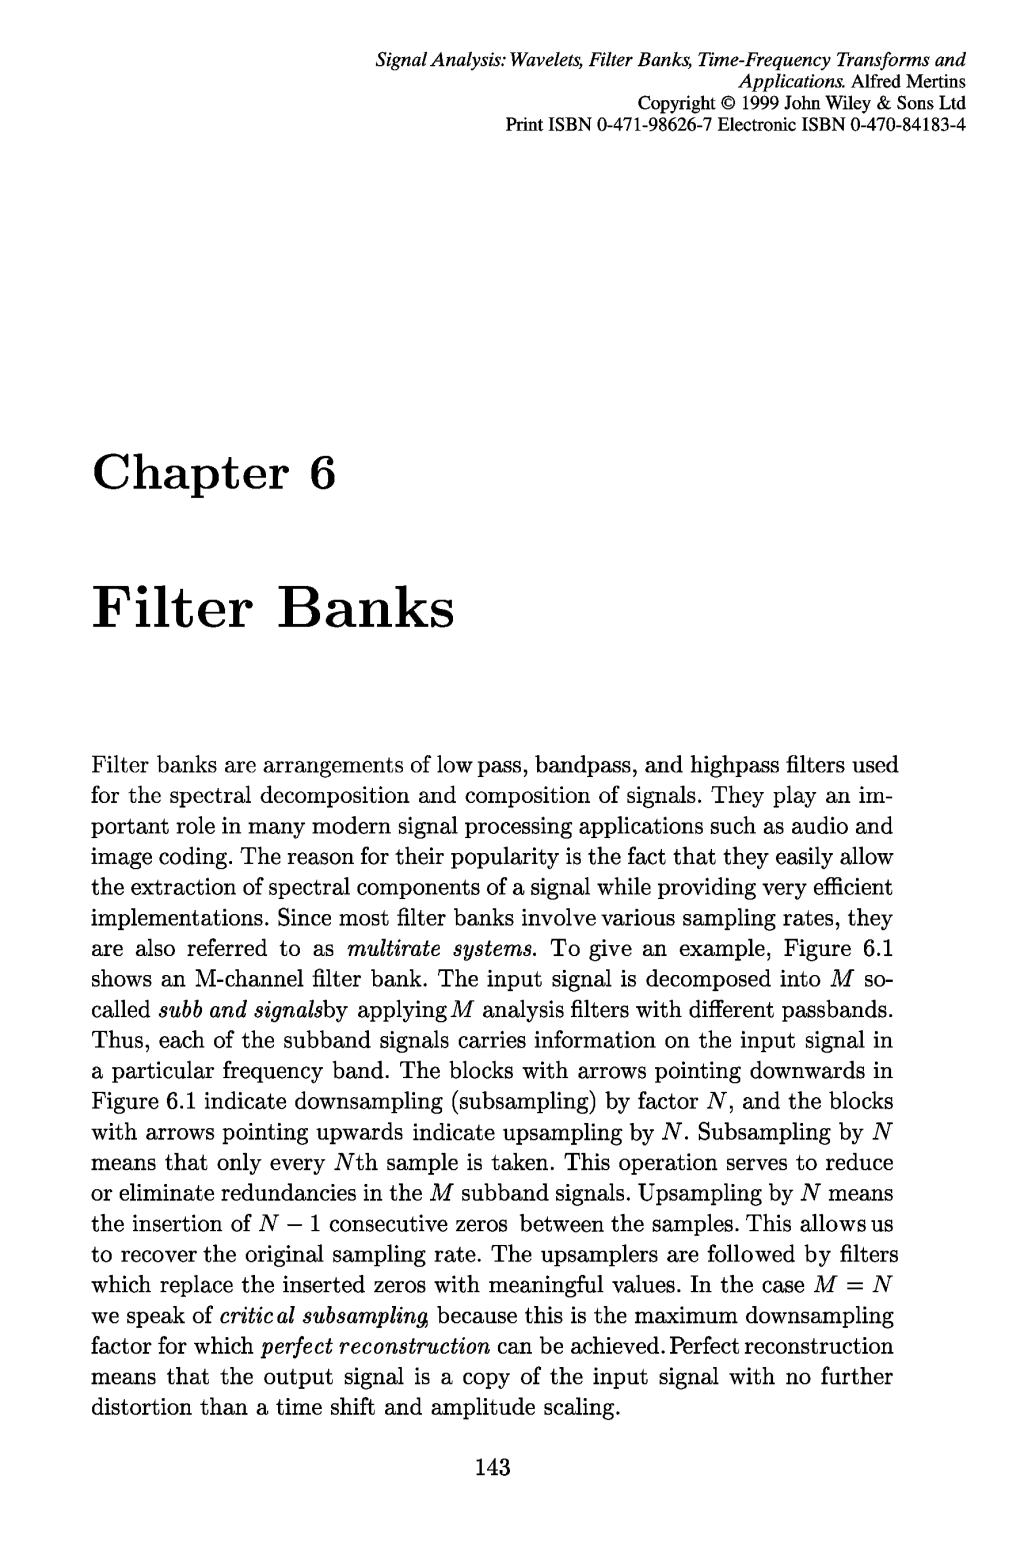 Filter Banks, Time-Frequency Transforms and Applications